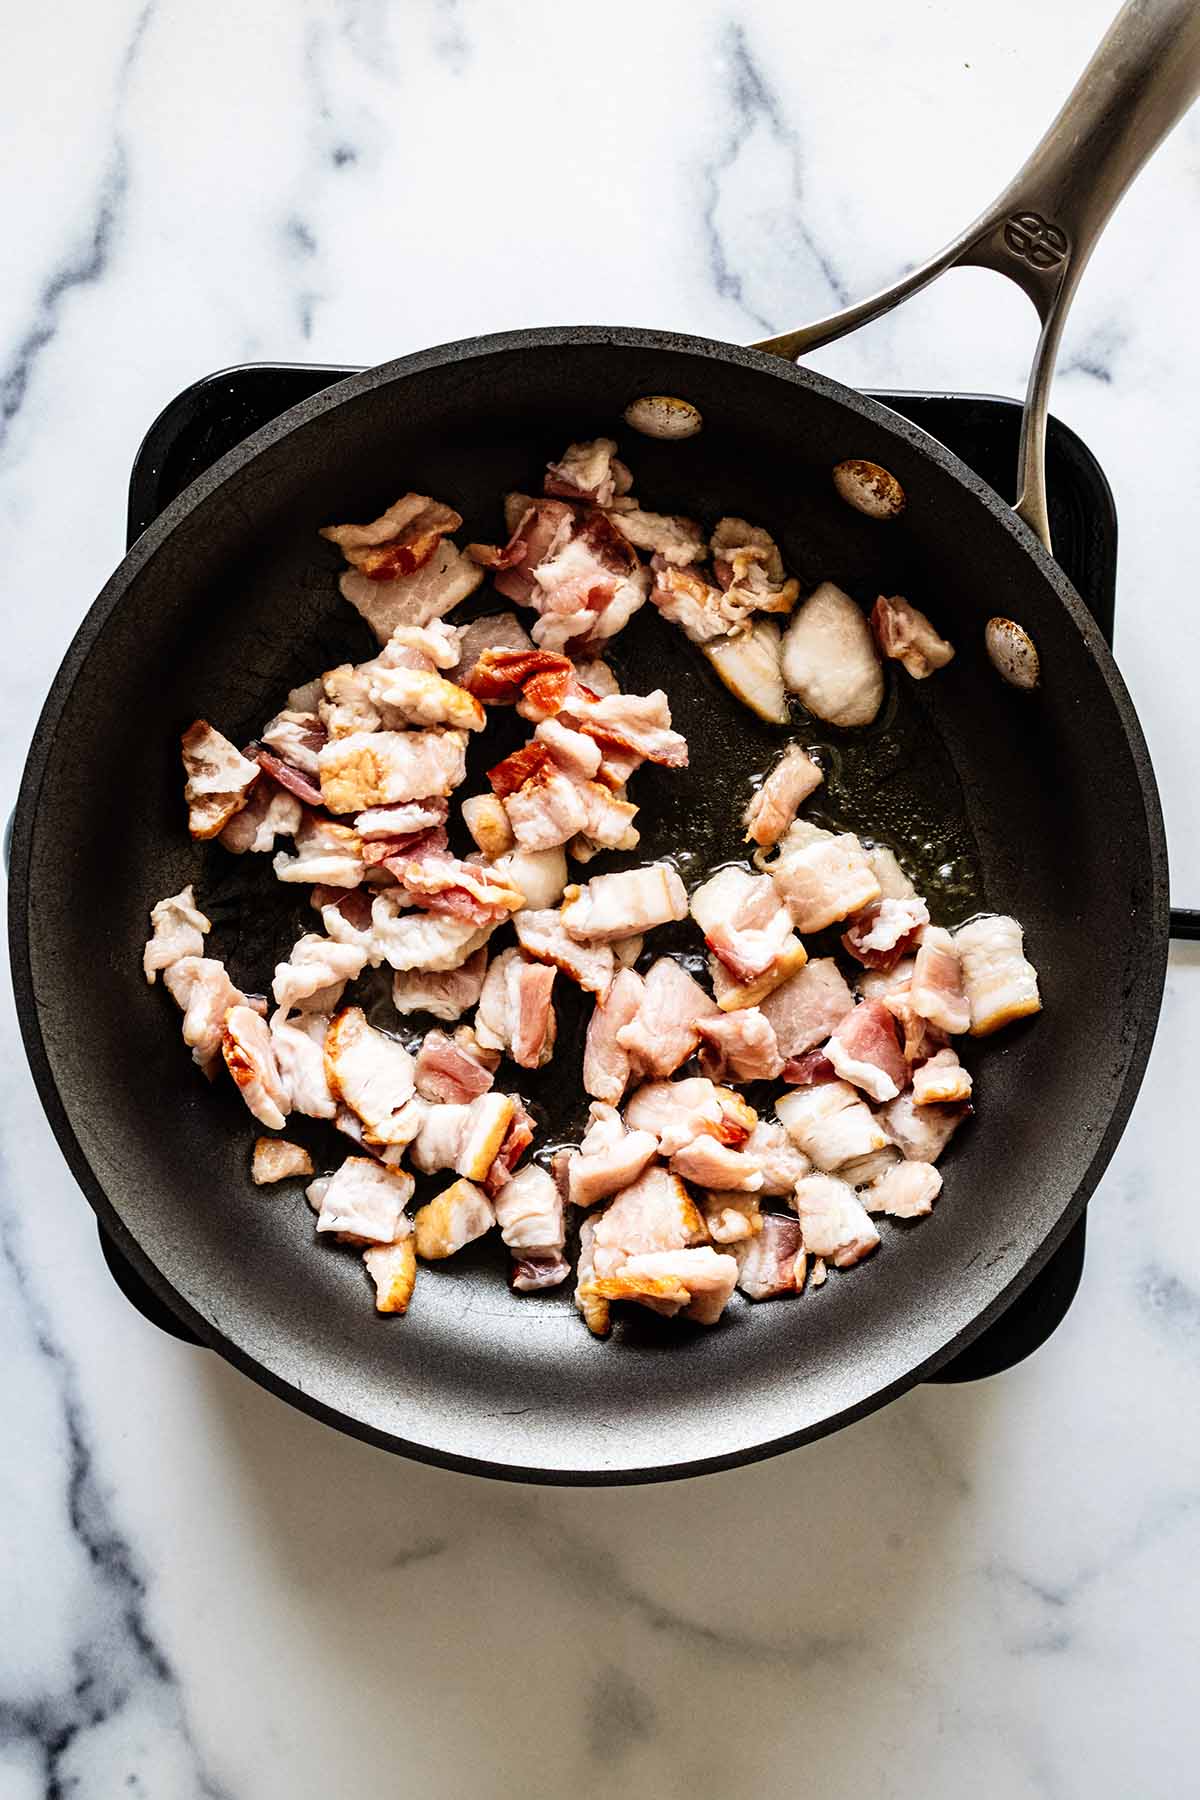 Overhead view of chopped bacon cooking in a skillet